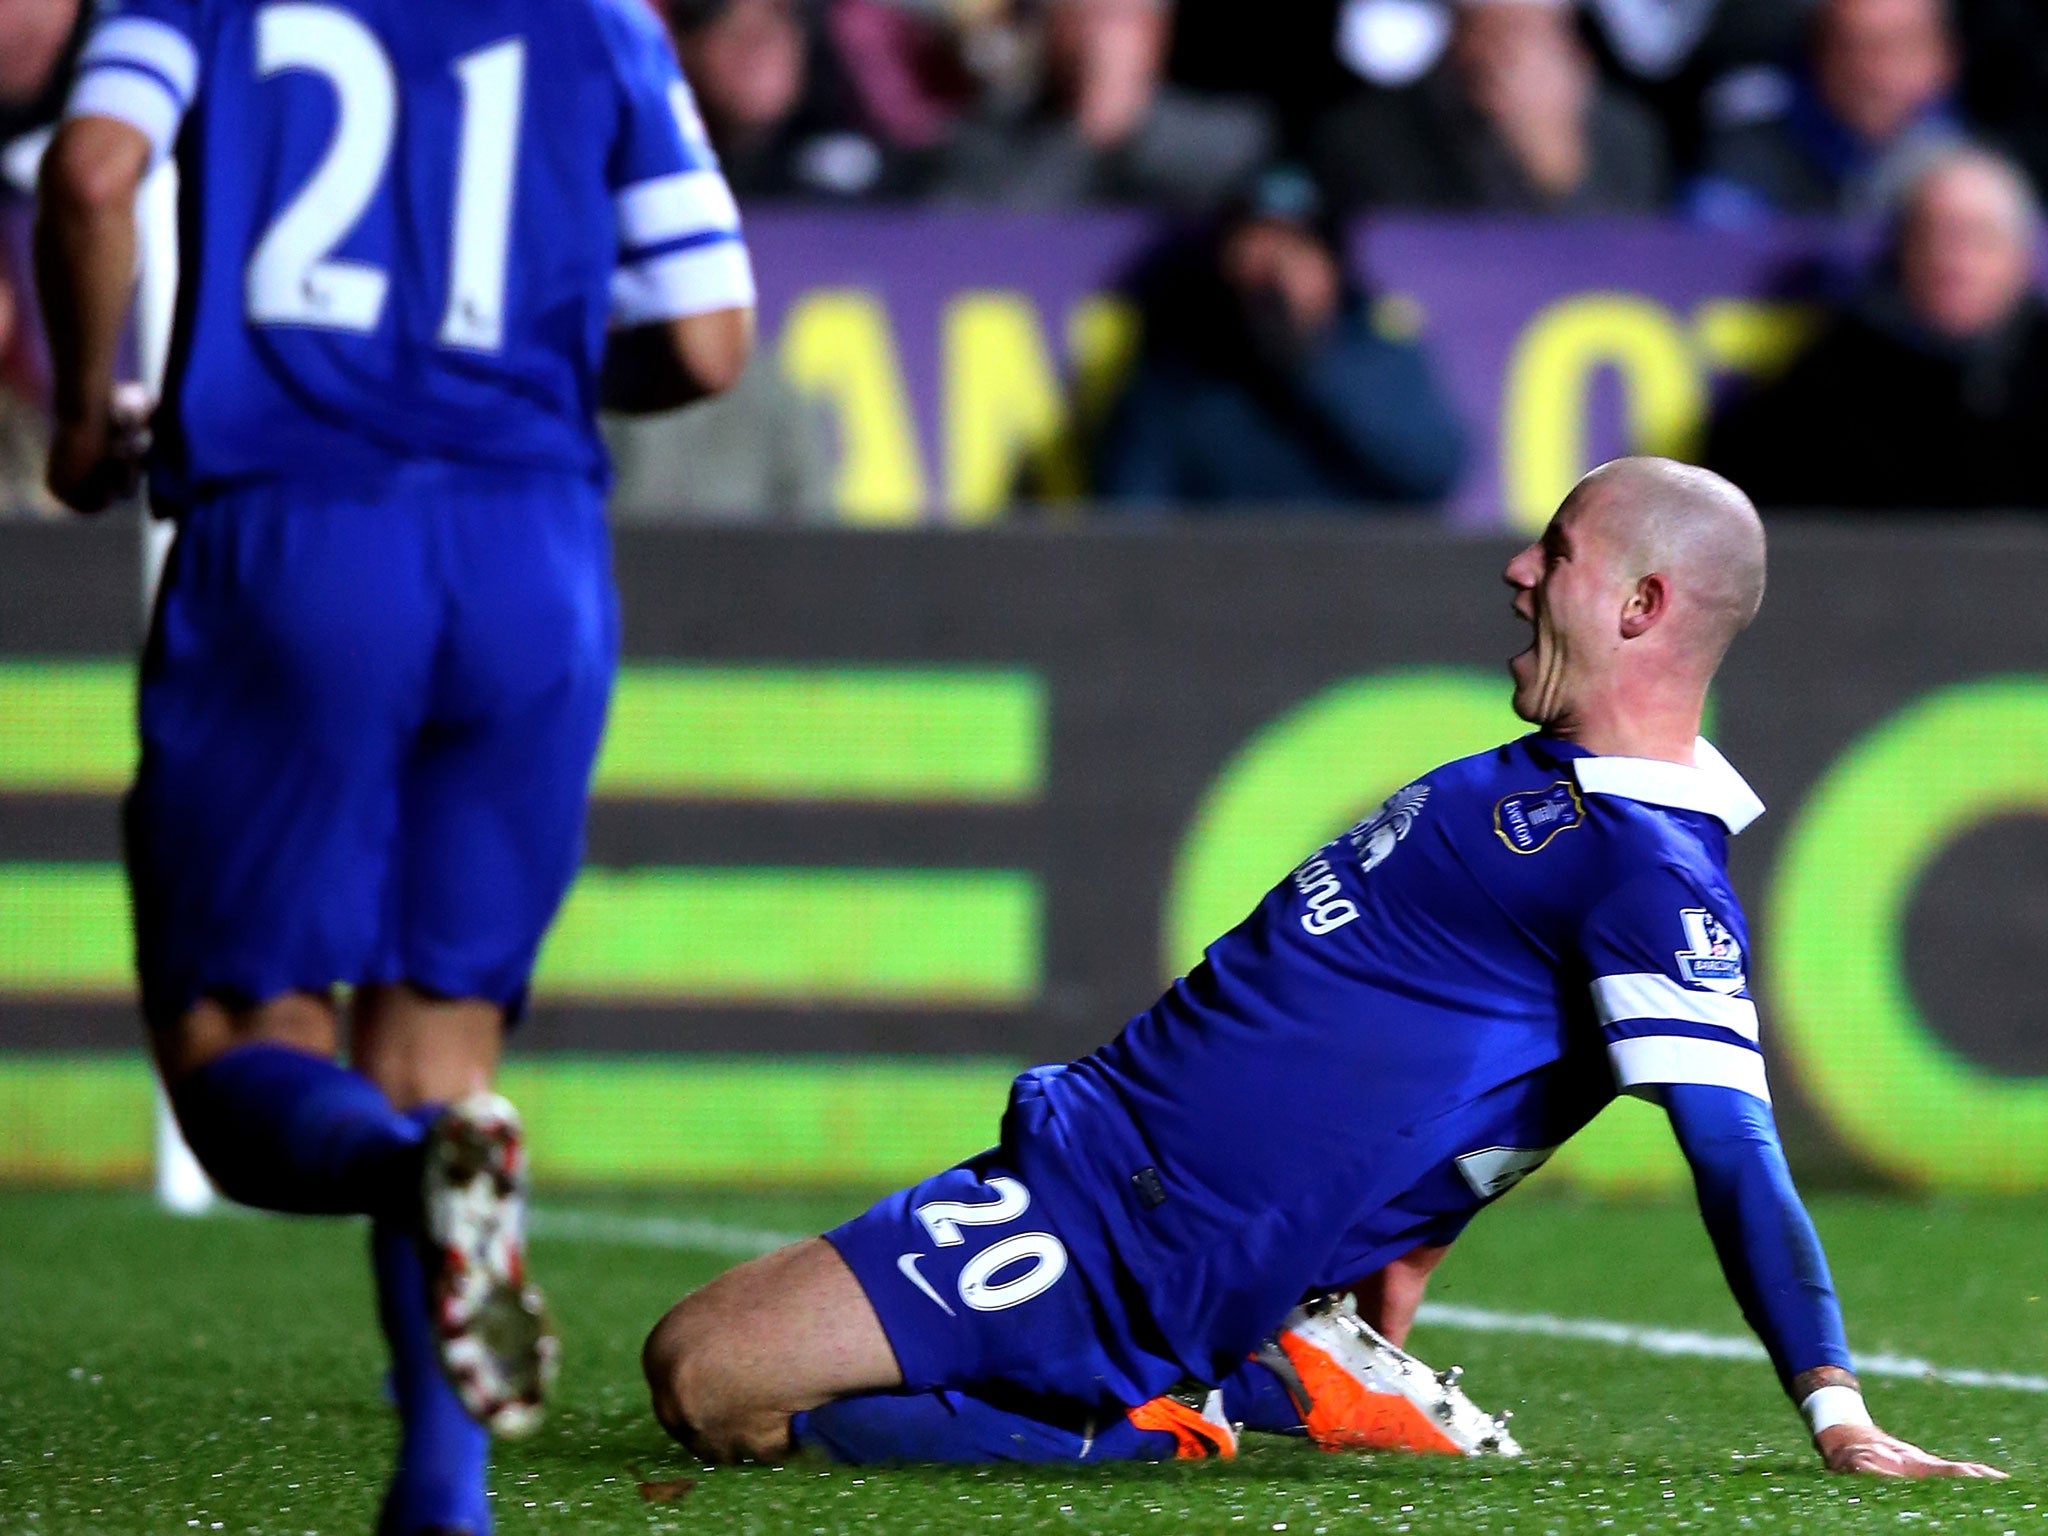 Ross Barkley of Everton celebrates after scoring his team's second goal